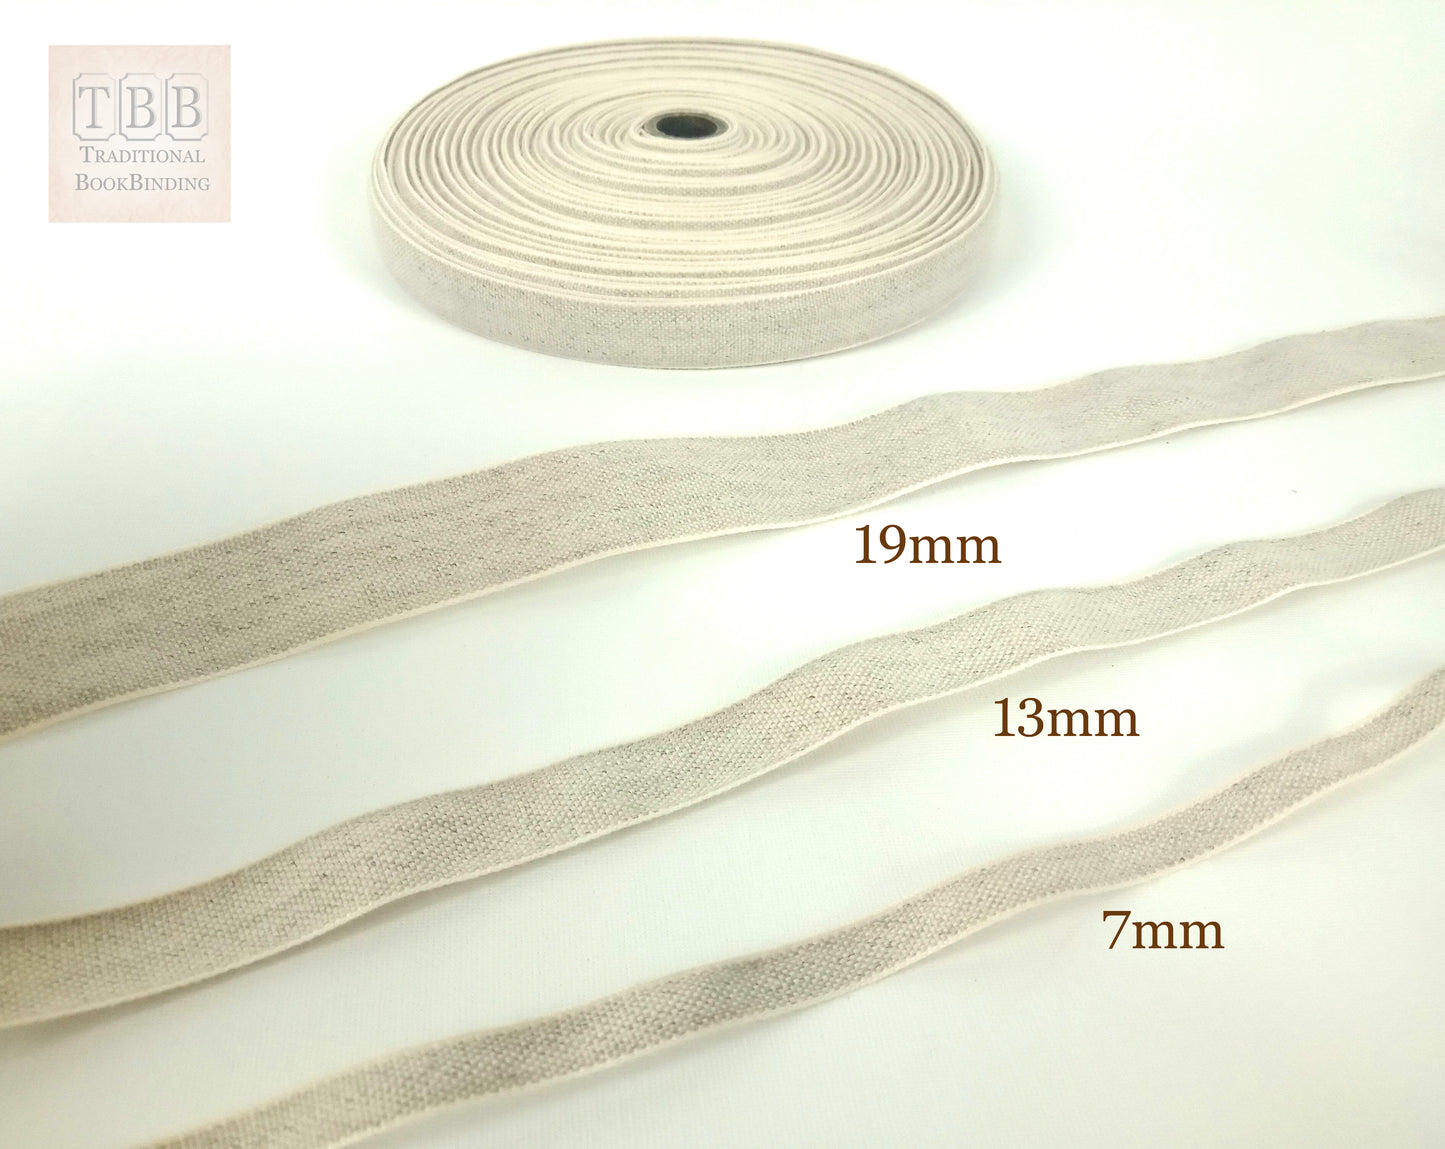 Quality bookbinding natural linen tapes